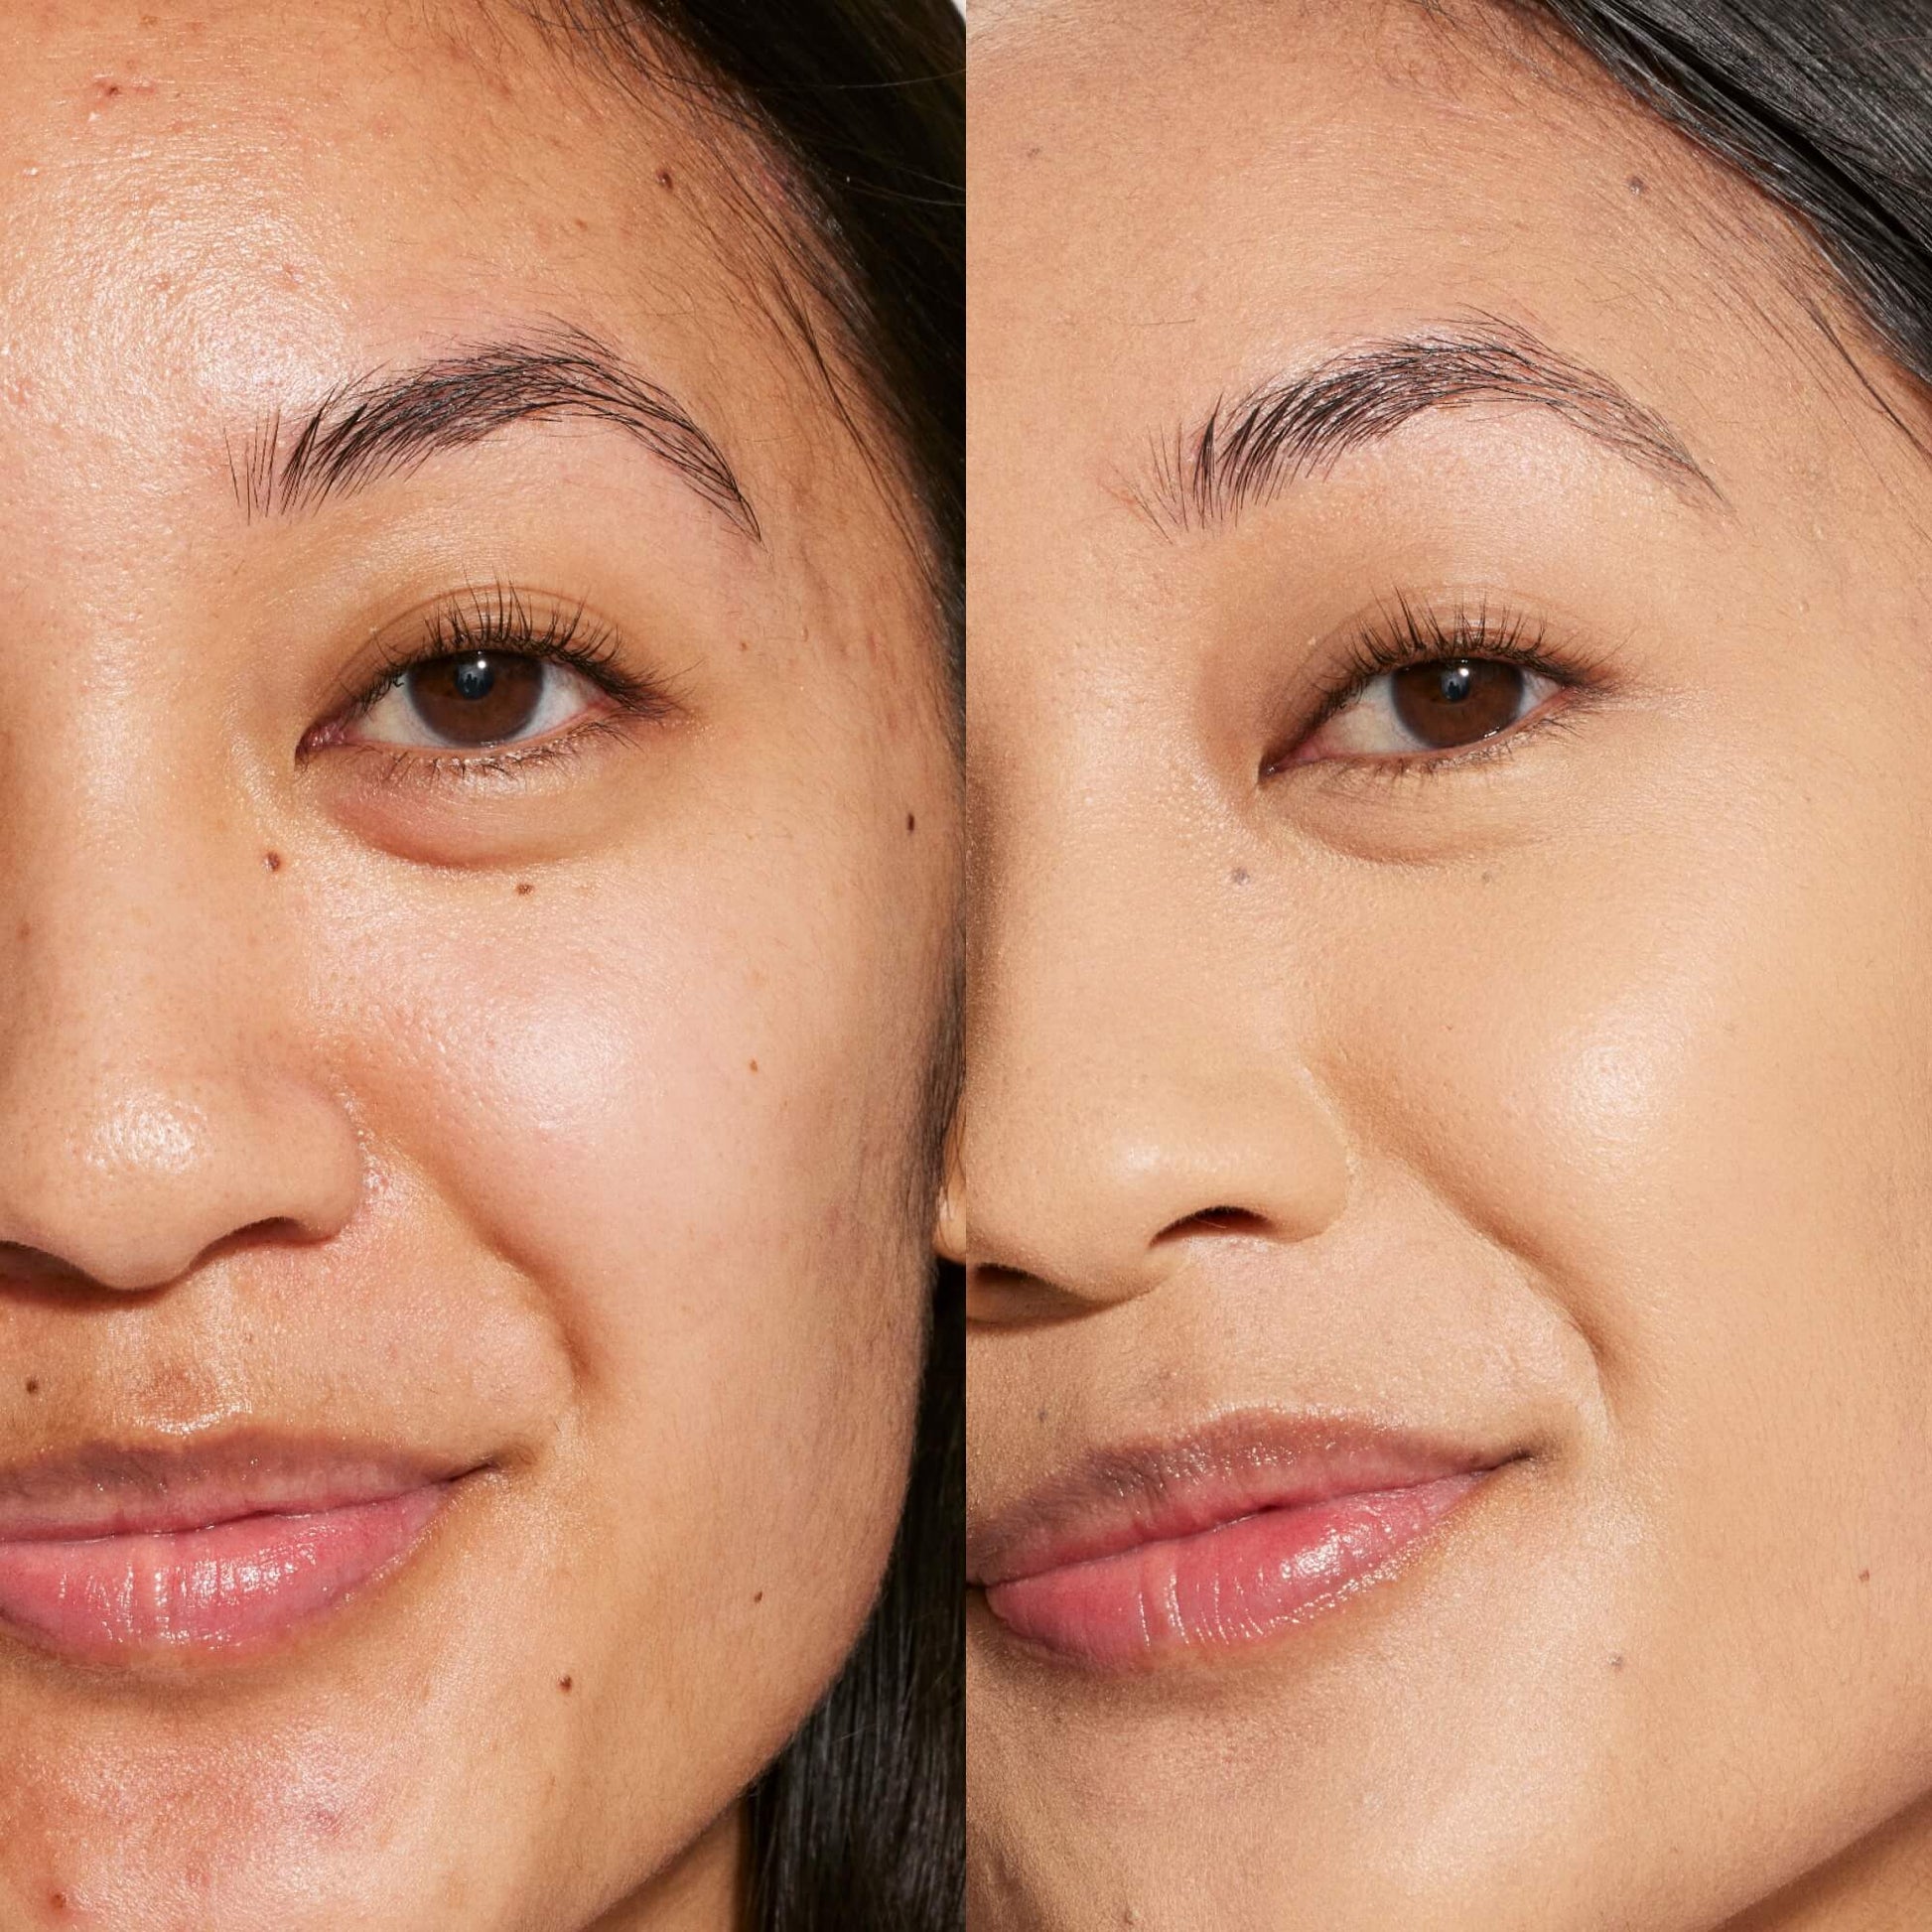 A person's face before and after using Tower 28 Beauty's Swipe Serum Concealer in shade 8.0 LBC to cover up dark circles, blemishes, and discoloration